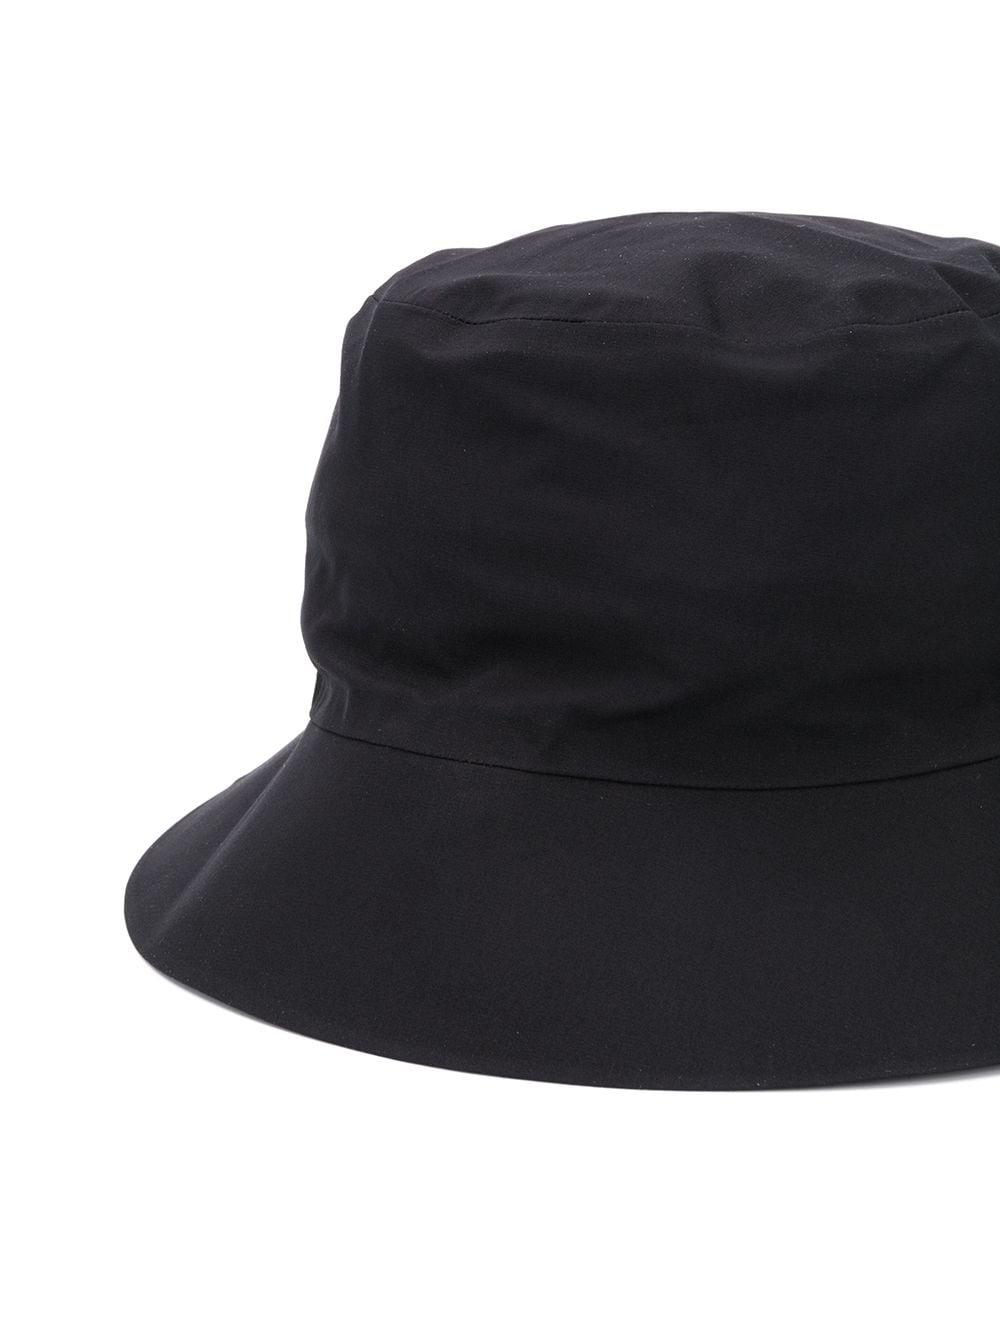 The North Face City Futurelight Bucket Hat in Black - Lyst